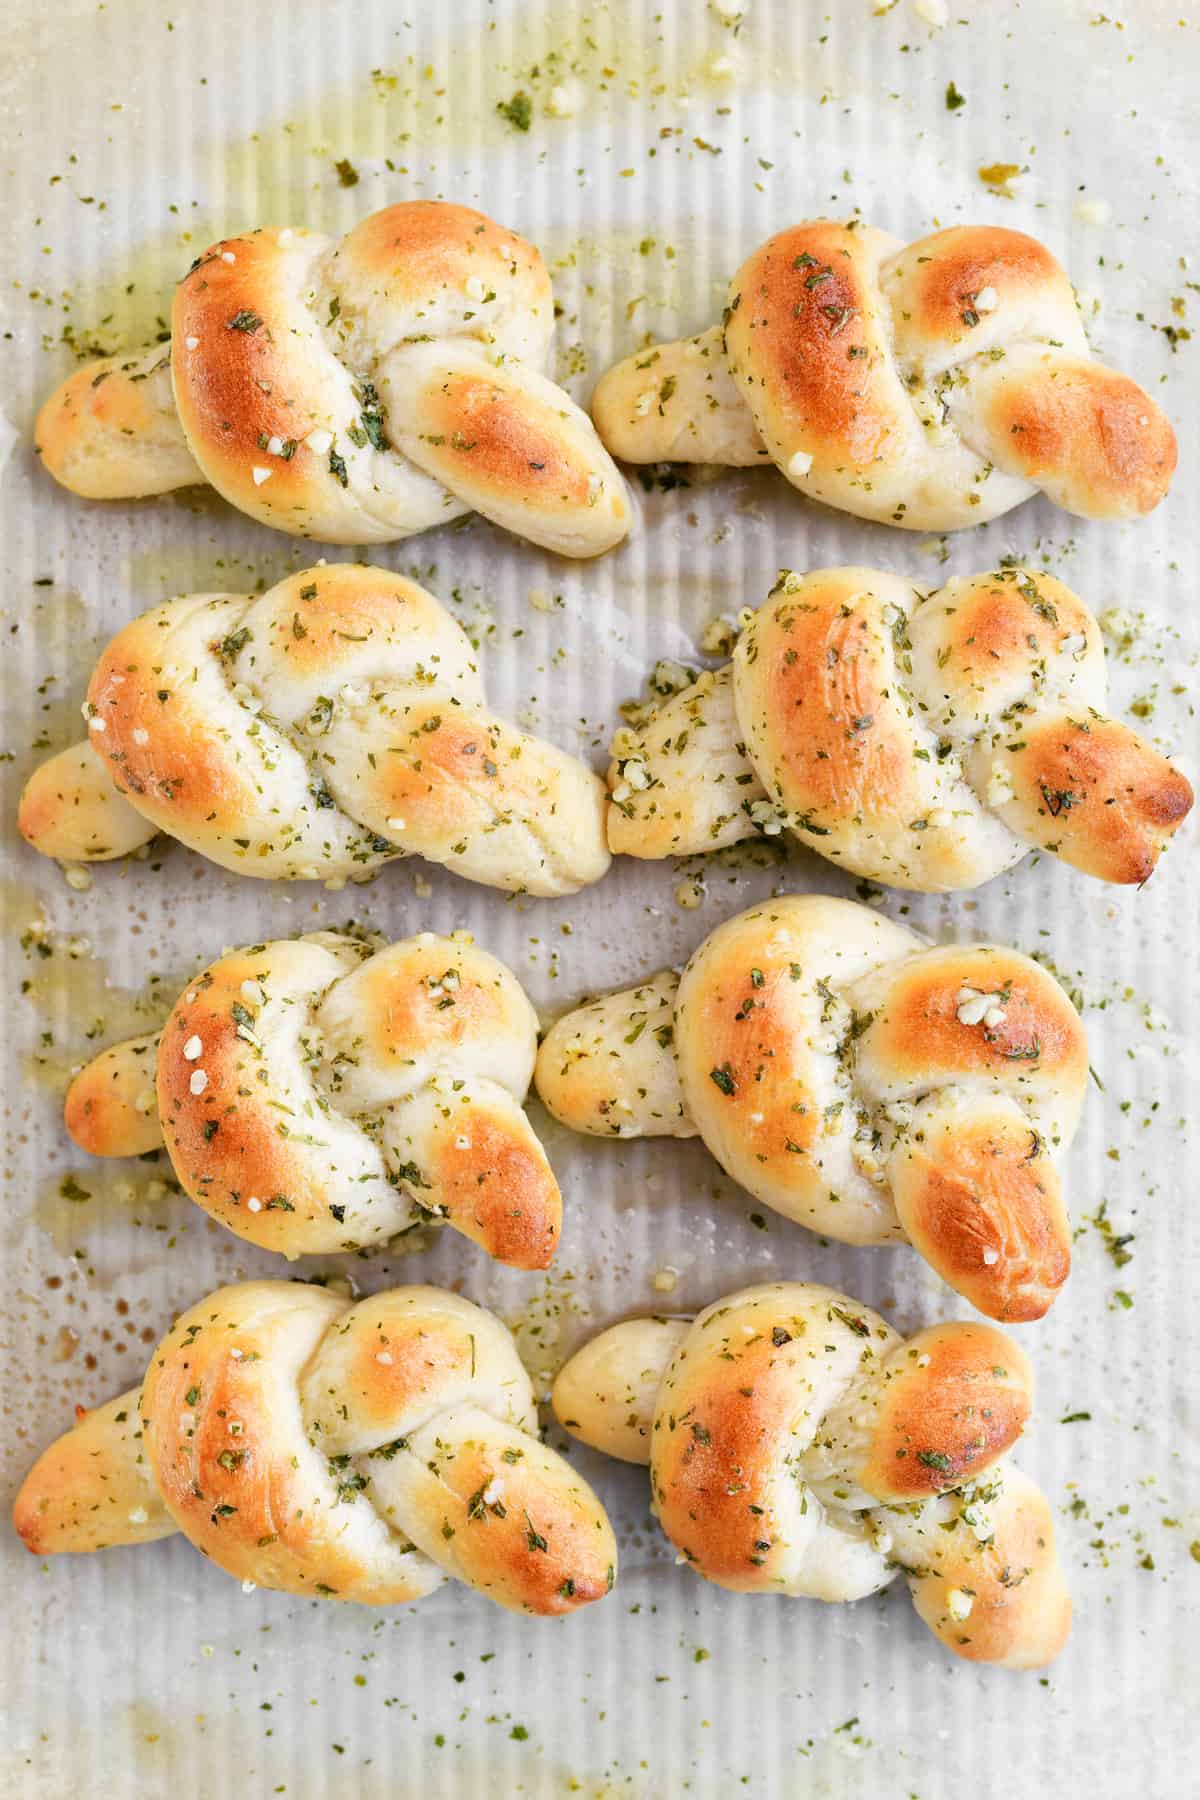 Eight garlic knots with butter and garlic on a pan.